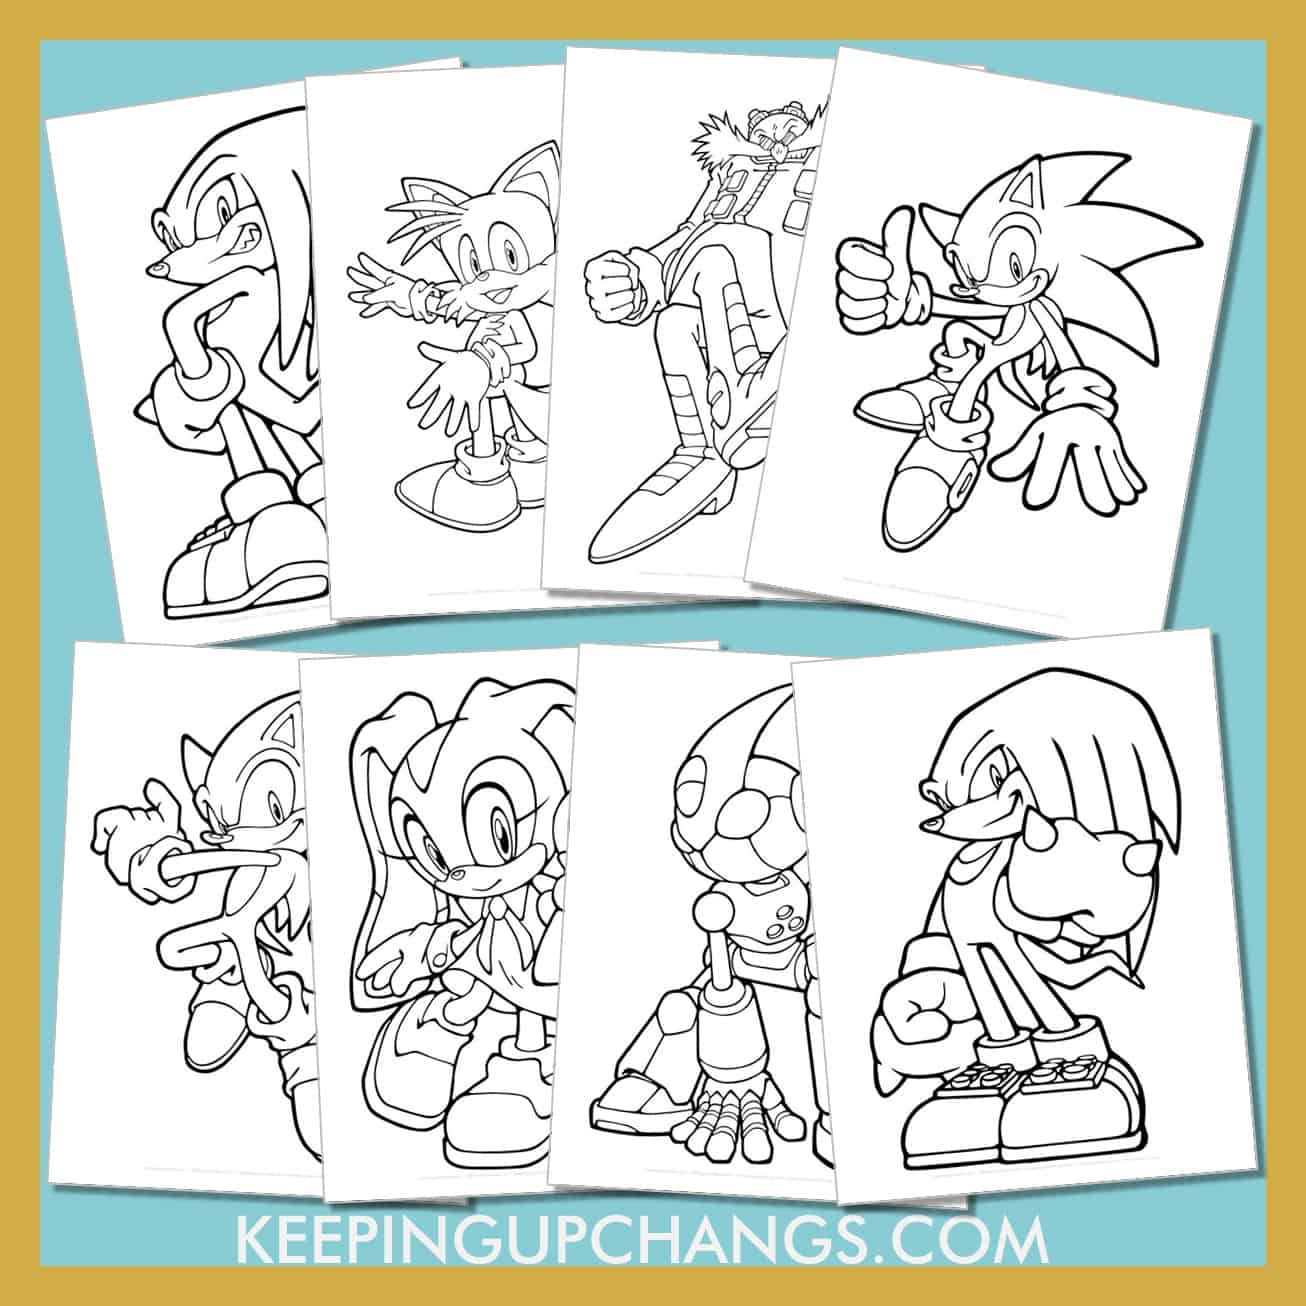 sonic colouring sheets including classic hedgehog, shadow, supersonic, blaze, tails and more.